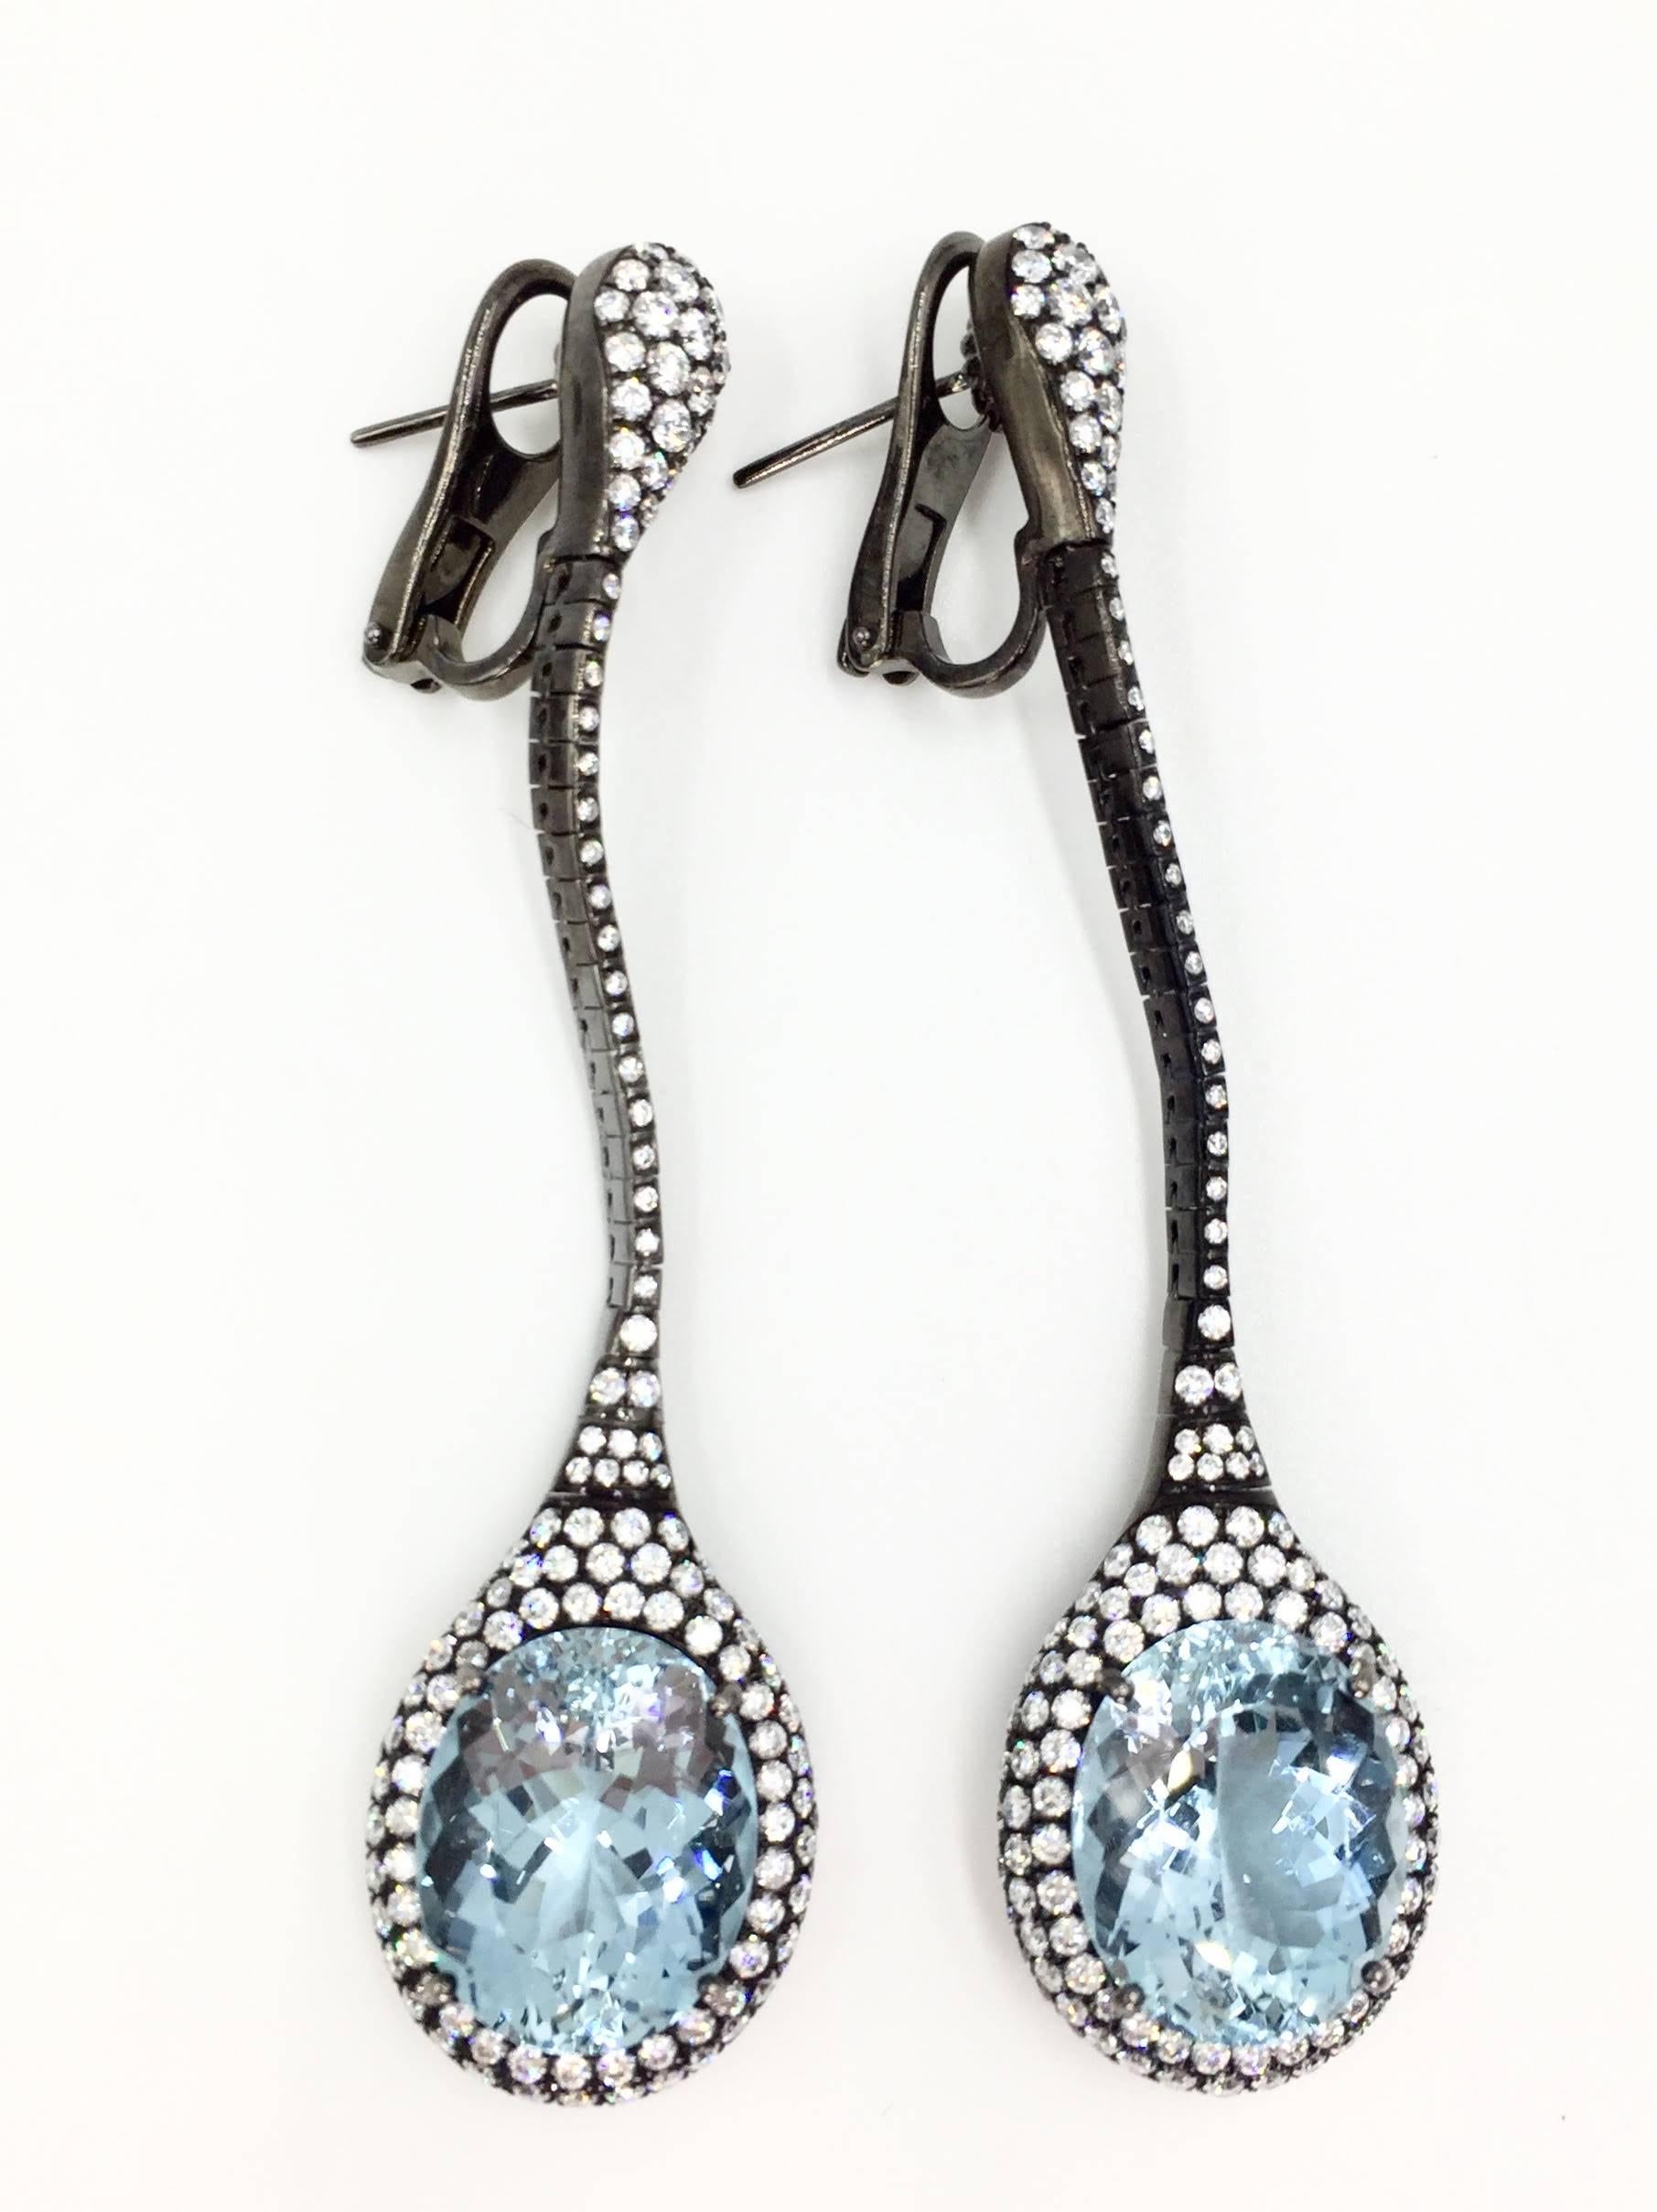 Modern and eye catching drop earrings by J. Stella. High quality white diamonds pop against the polished black 18K gold. Two large beautiful genuine oval faceted aquamarines have a total weight of 19.26 carats. 304 white round brilliant diamonds